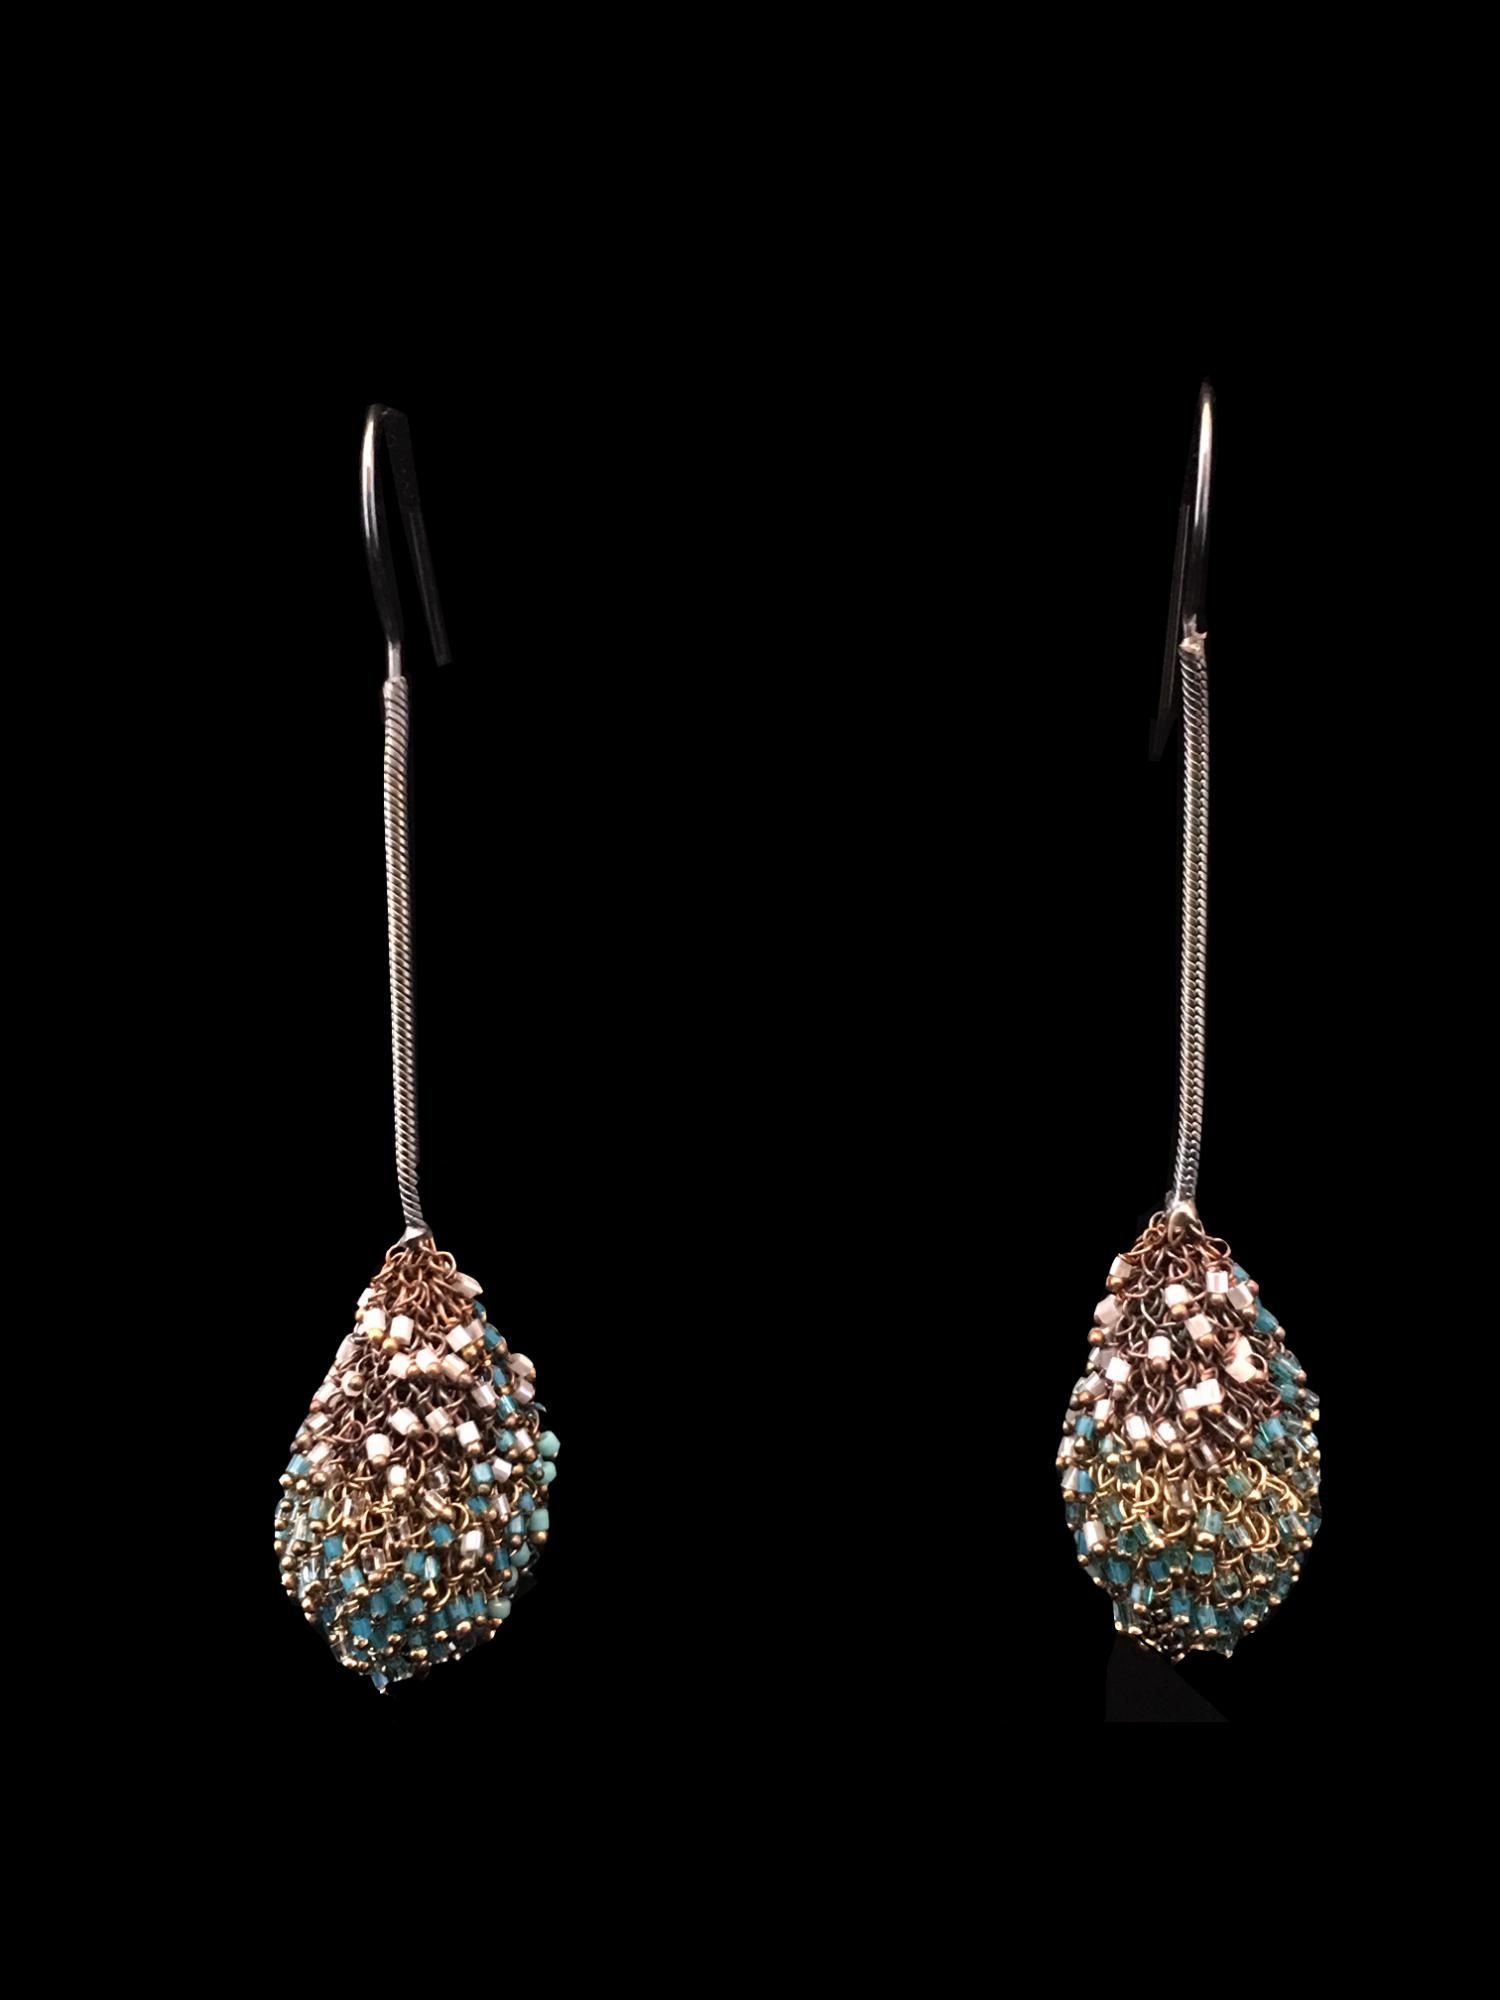 Woven Dangle Pod Earrings with Swarovski Crystals (51TQR))